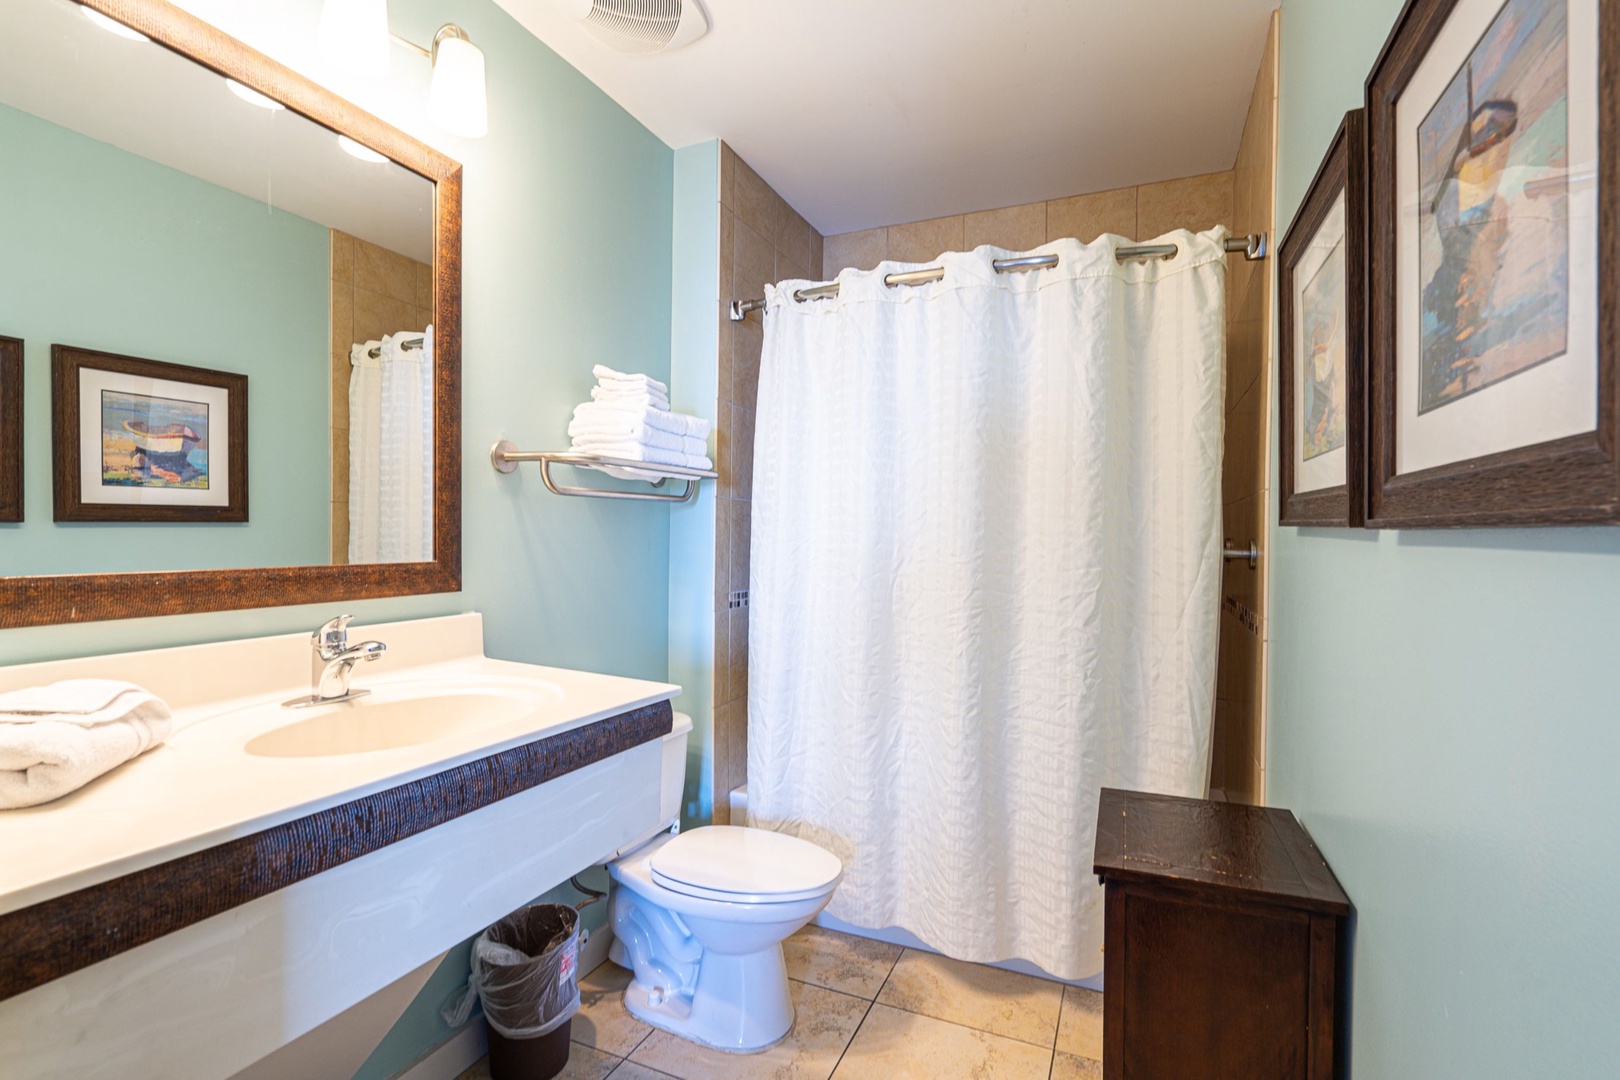 A single vanity & shower/tub combo await in the second full bathroom